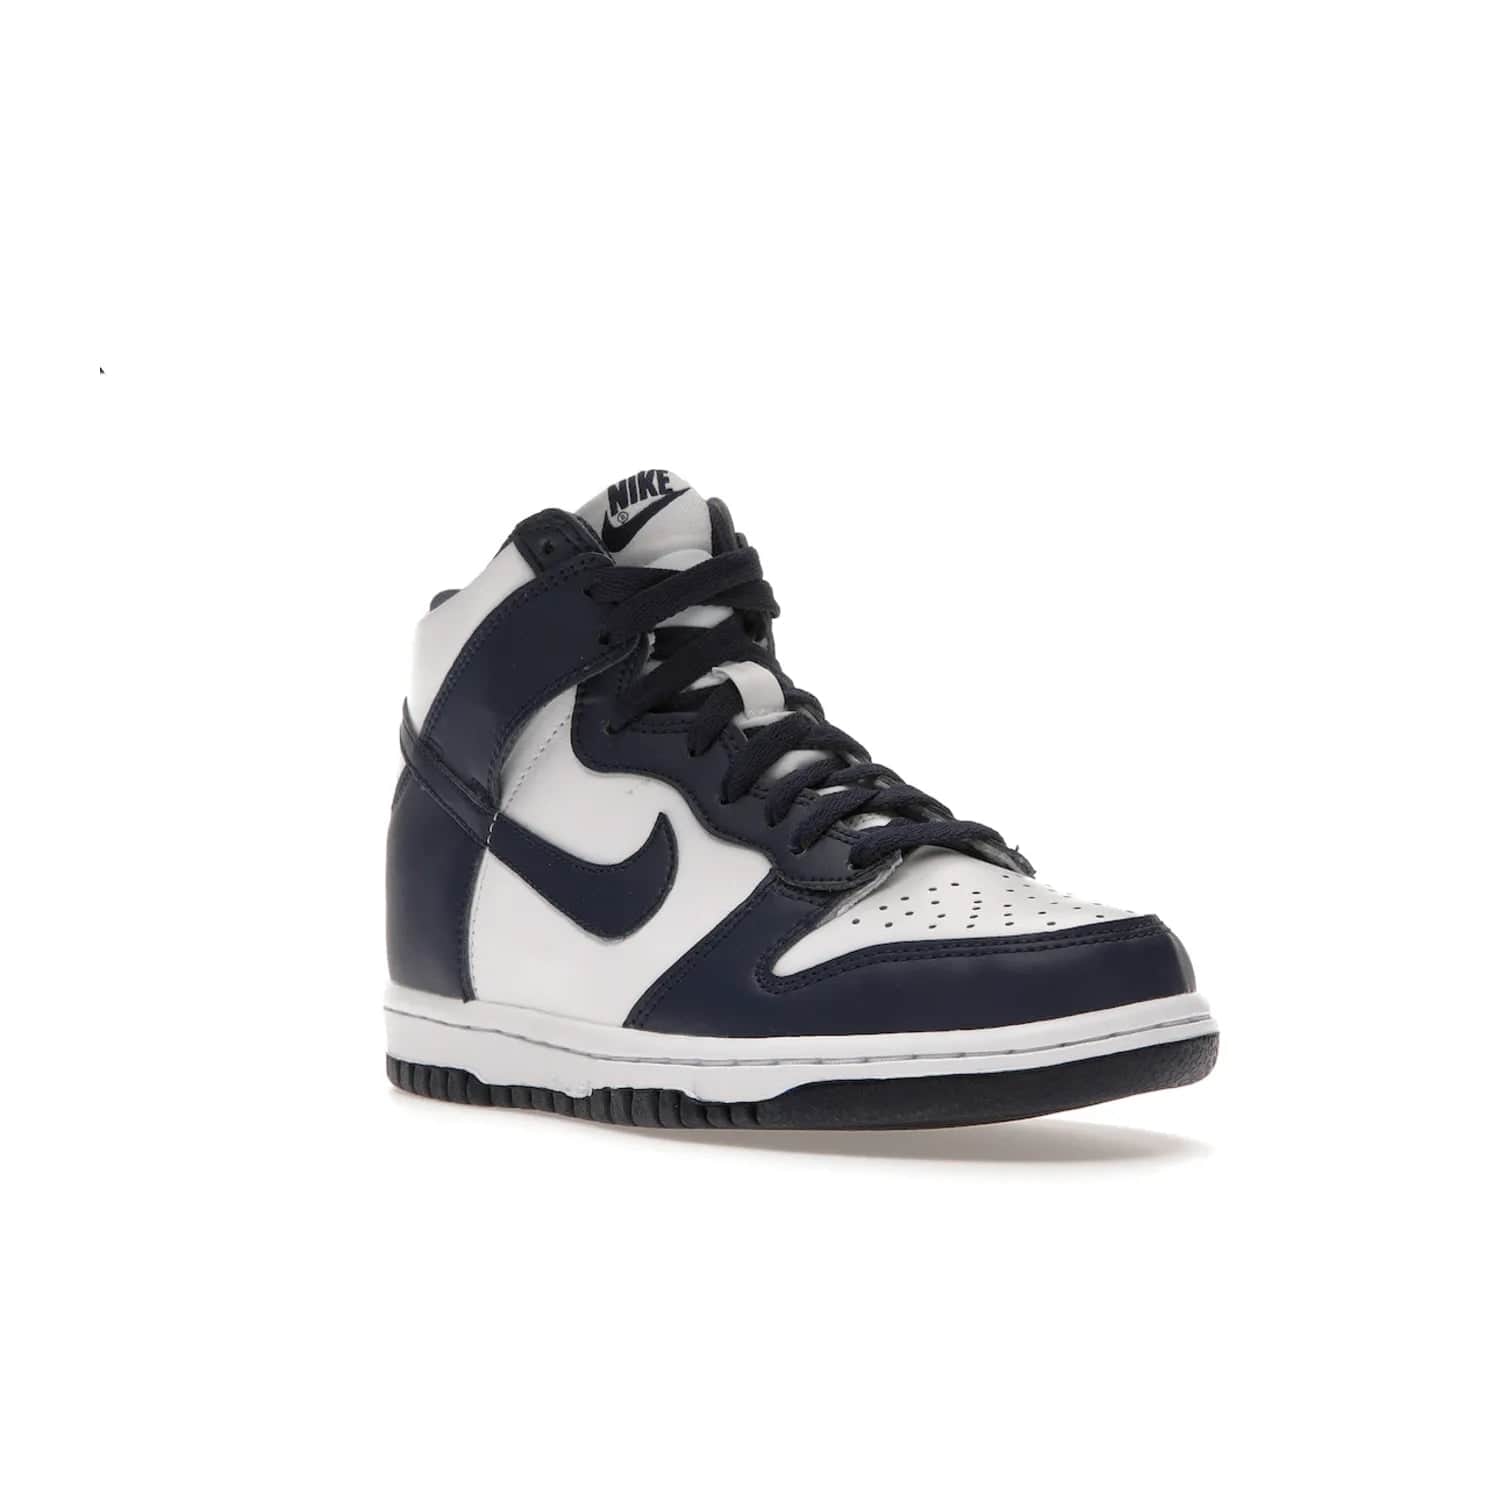 Nike Dunk High Championship Navy (GS) - Image 6 - Only at www.BallersClubKickz.com - Nike Dunk High Championship Navy GS: classic leather, suede, synthetic upper, chunky midsole, rubber herringbone sole. White base overlaid with Midnight Navy for a stylish finish. Padded high-cut collar and signature Nike swoosh design. Step out in these shoes and make a statement. Comfort and style at its finest.